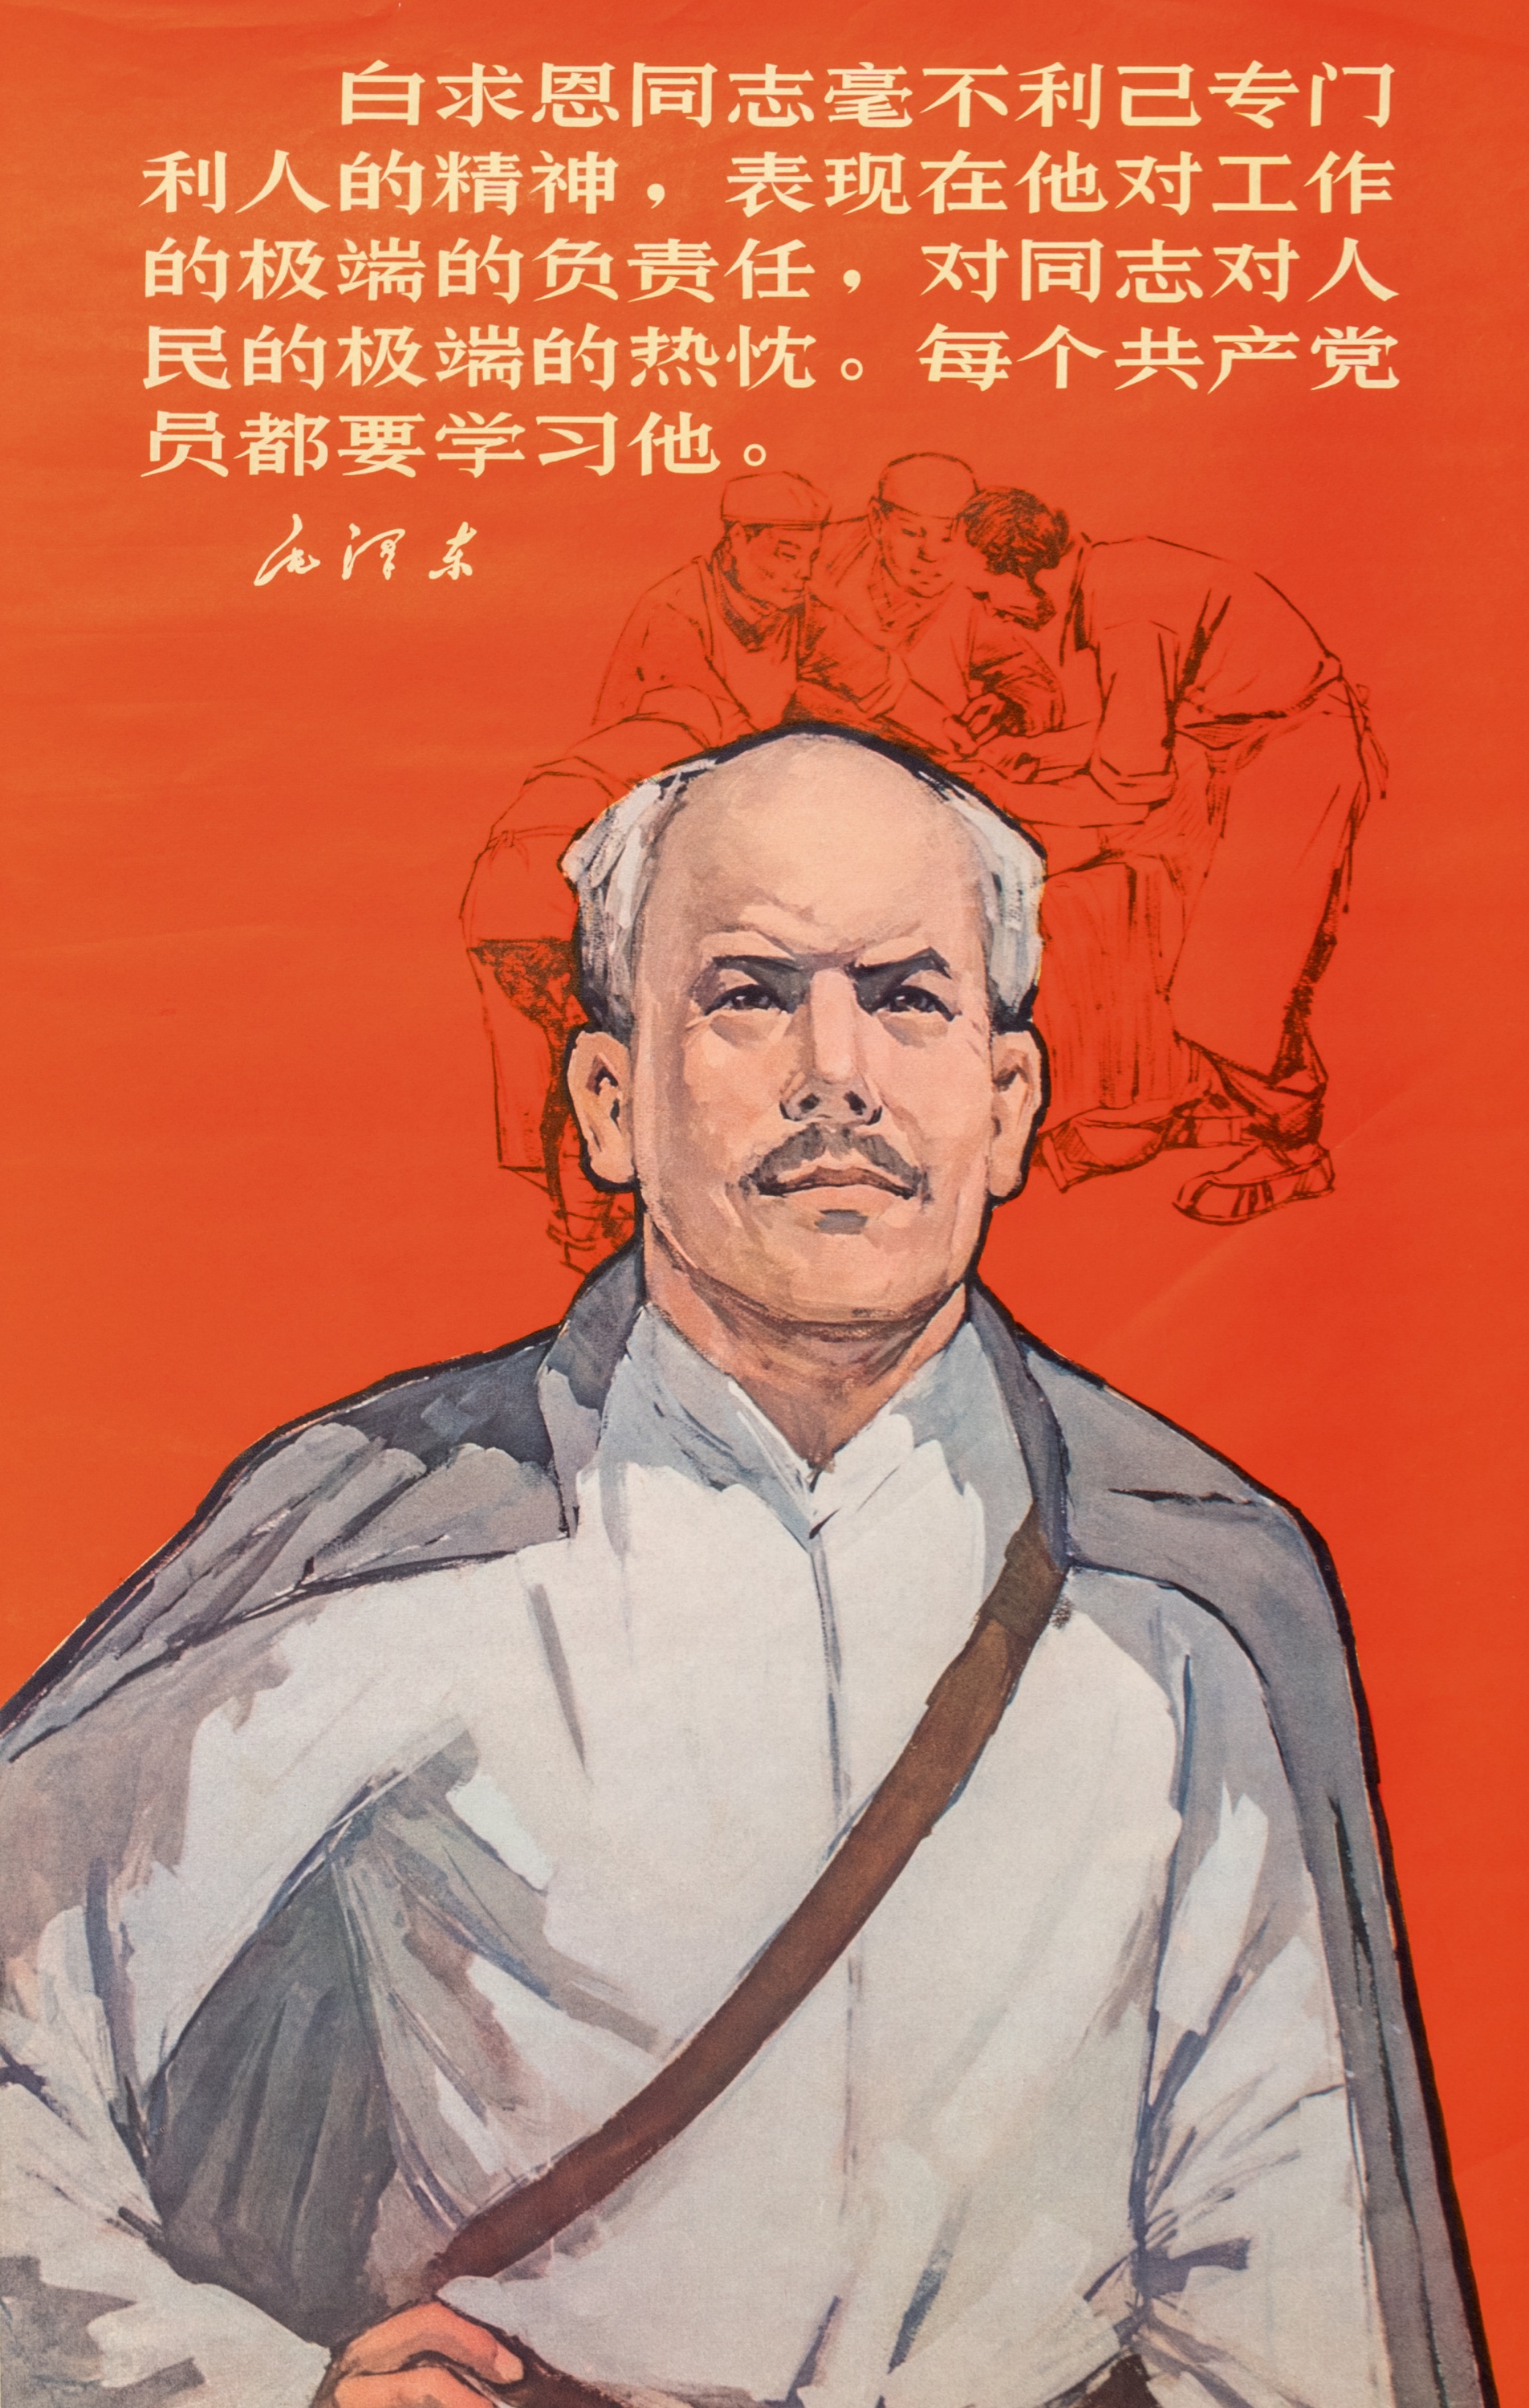 29 Chinese Cultural Revolution propaganda posters - Image 37 of 43